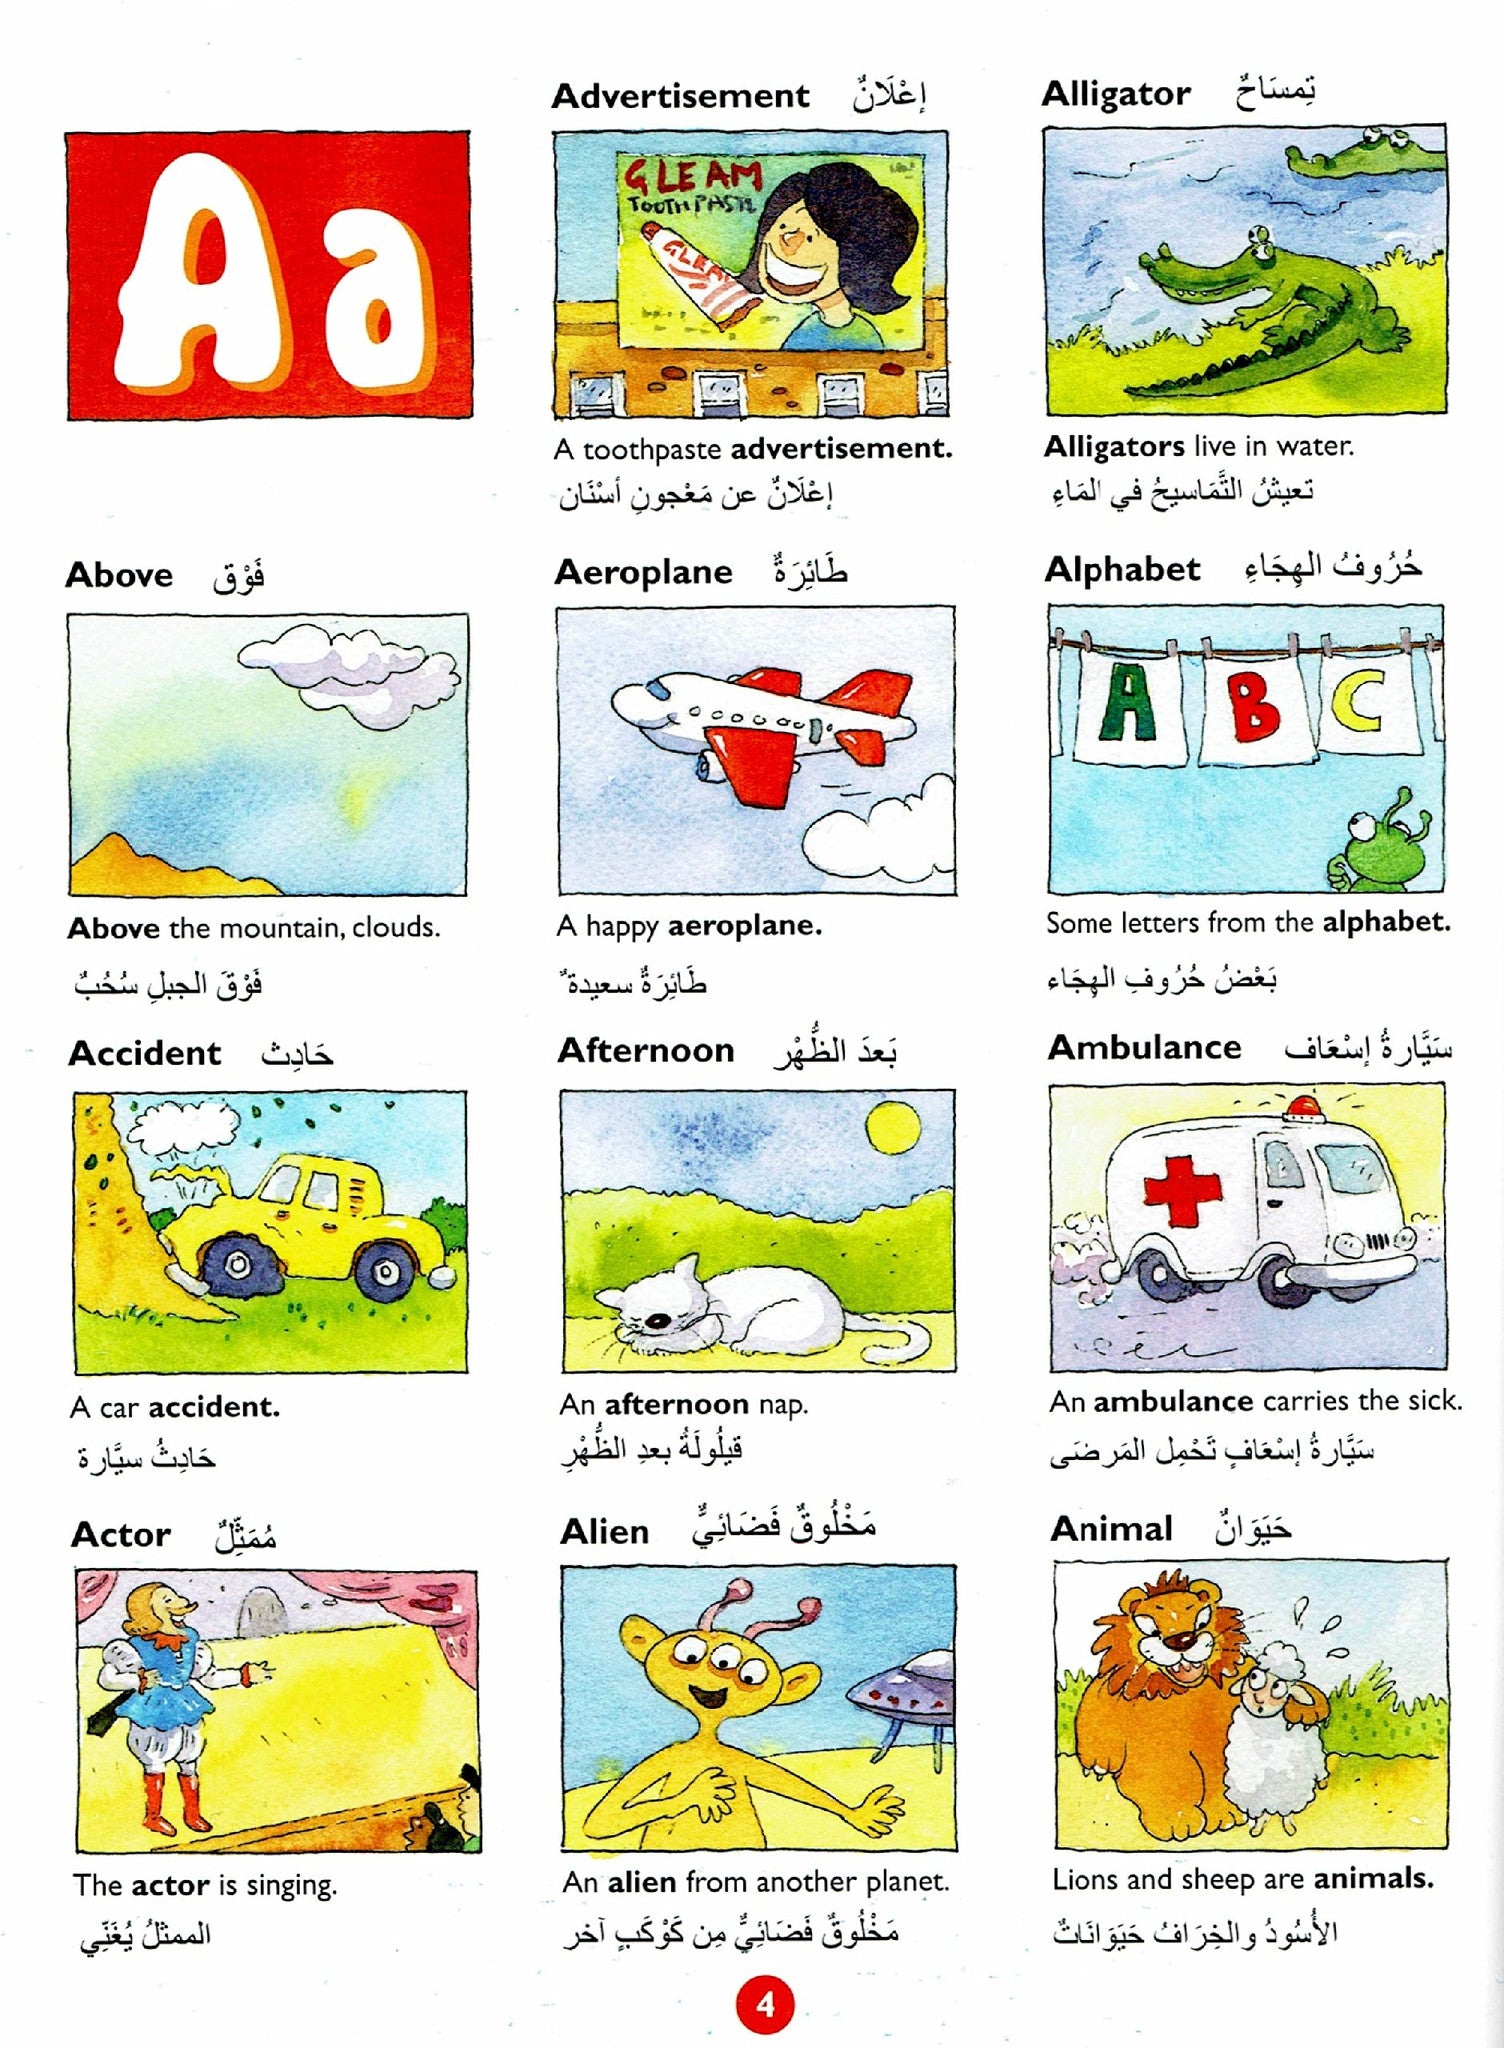 Arabic Picture Dictionary for Kids - Anafiya Gifts